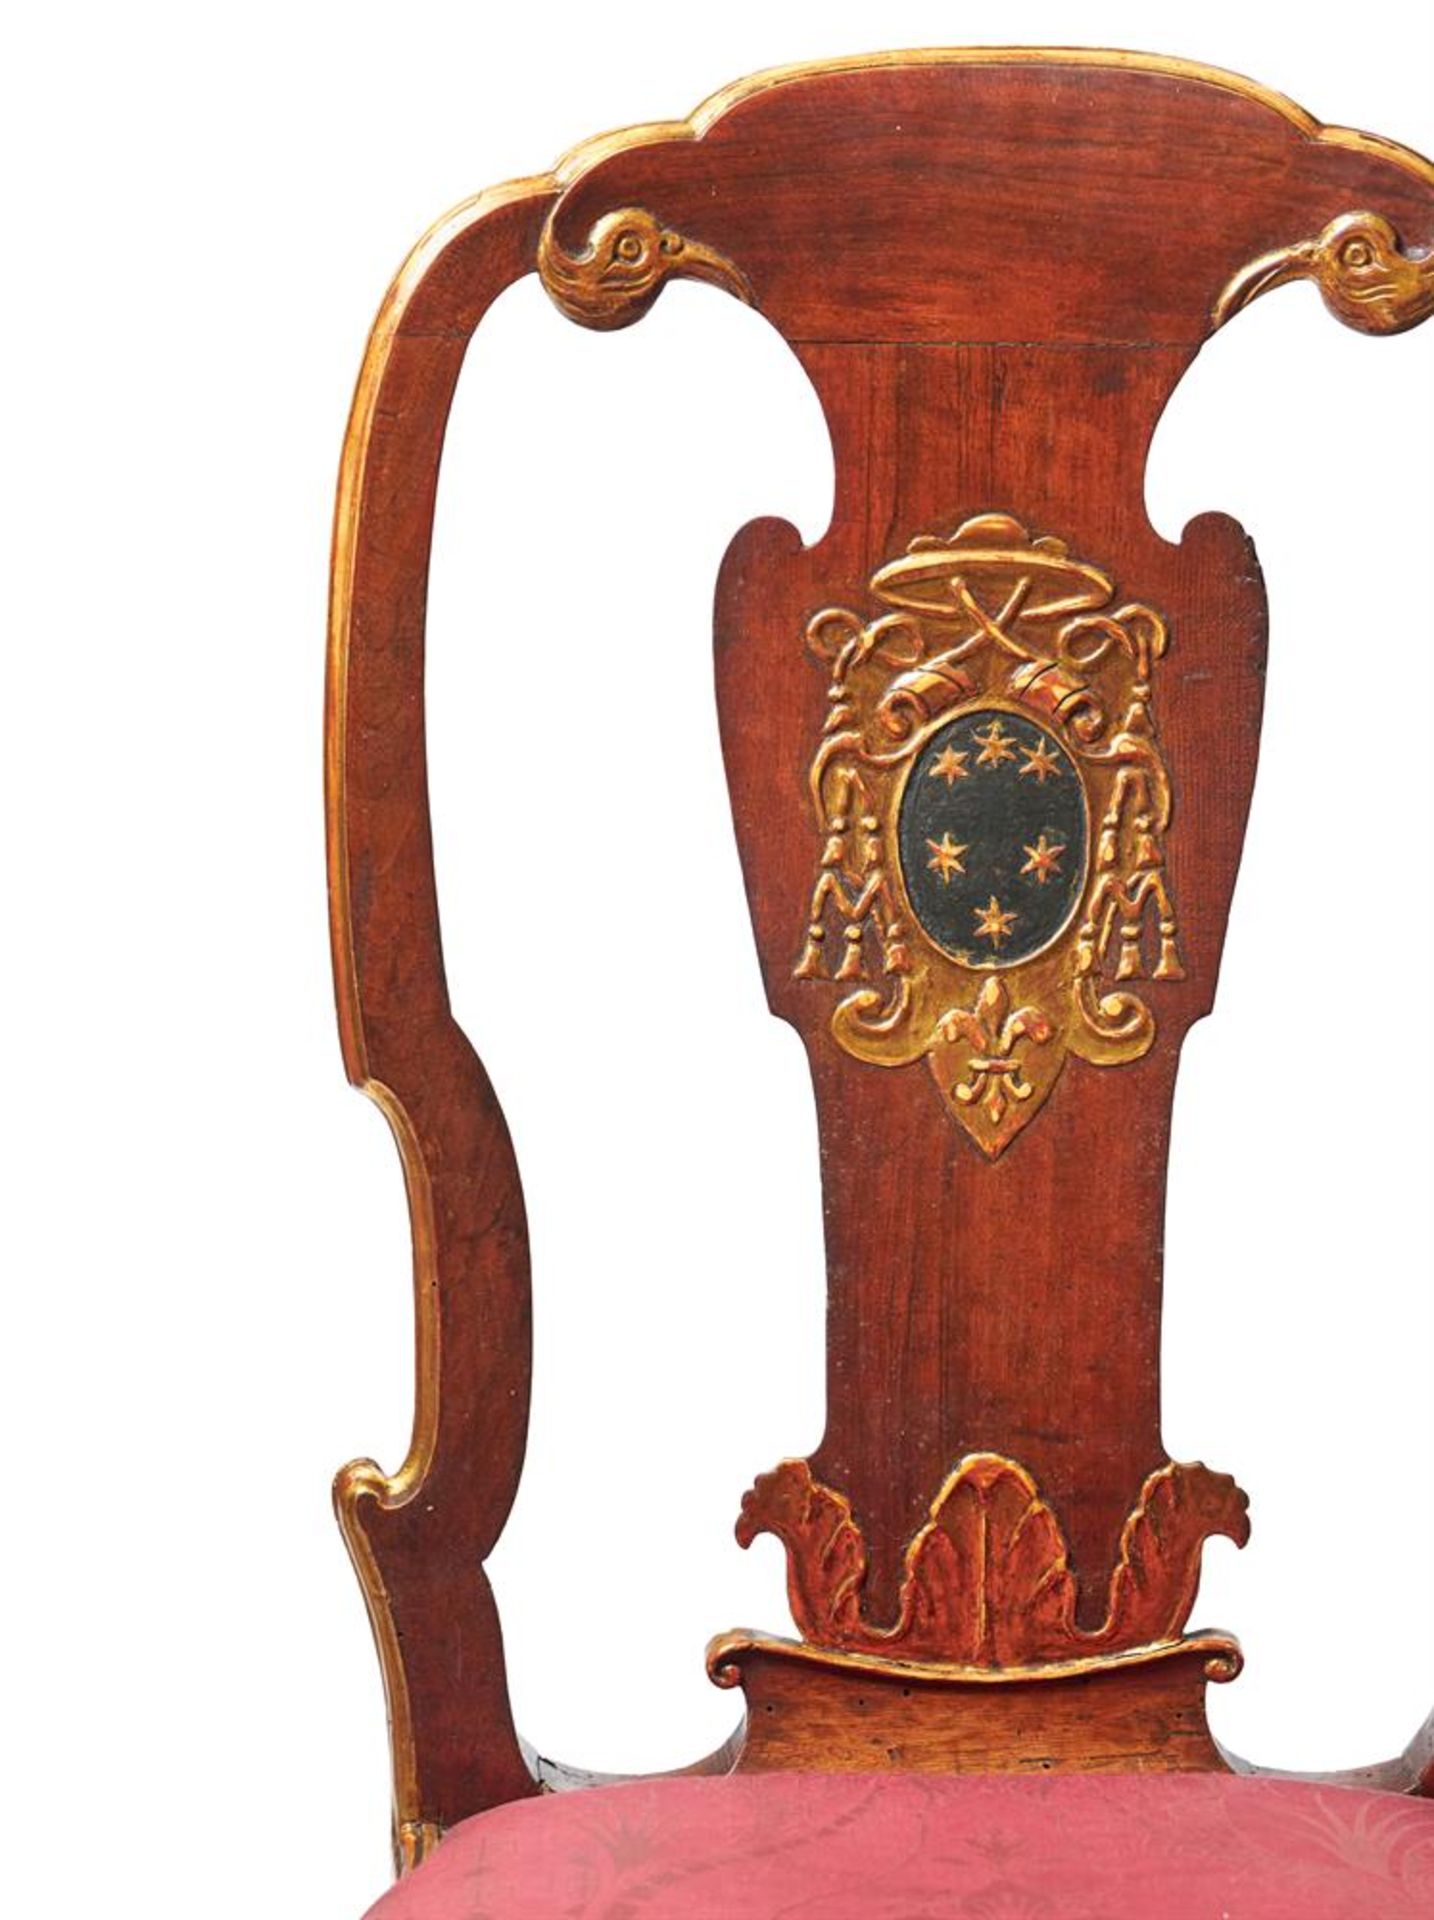 A SET OF EIGHT GEORGE II WALNUT AND PARCEL GILT DINING CHAIRSCIRCA 1730With repeating eagle motifs - Image 6 of 7